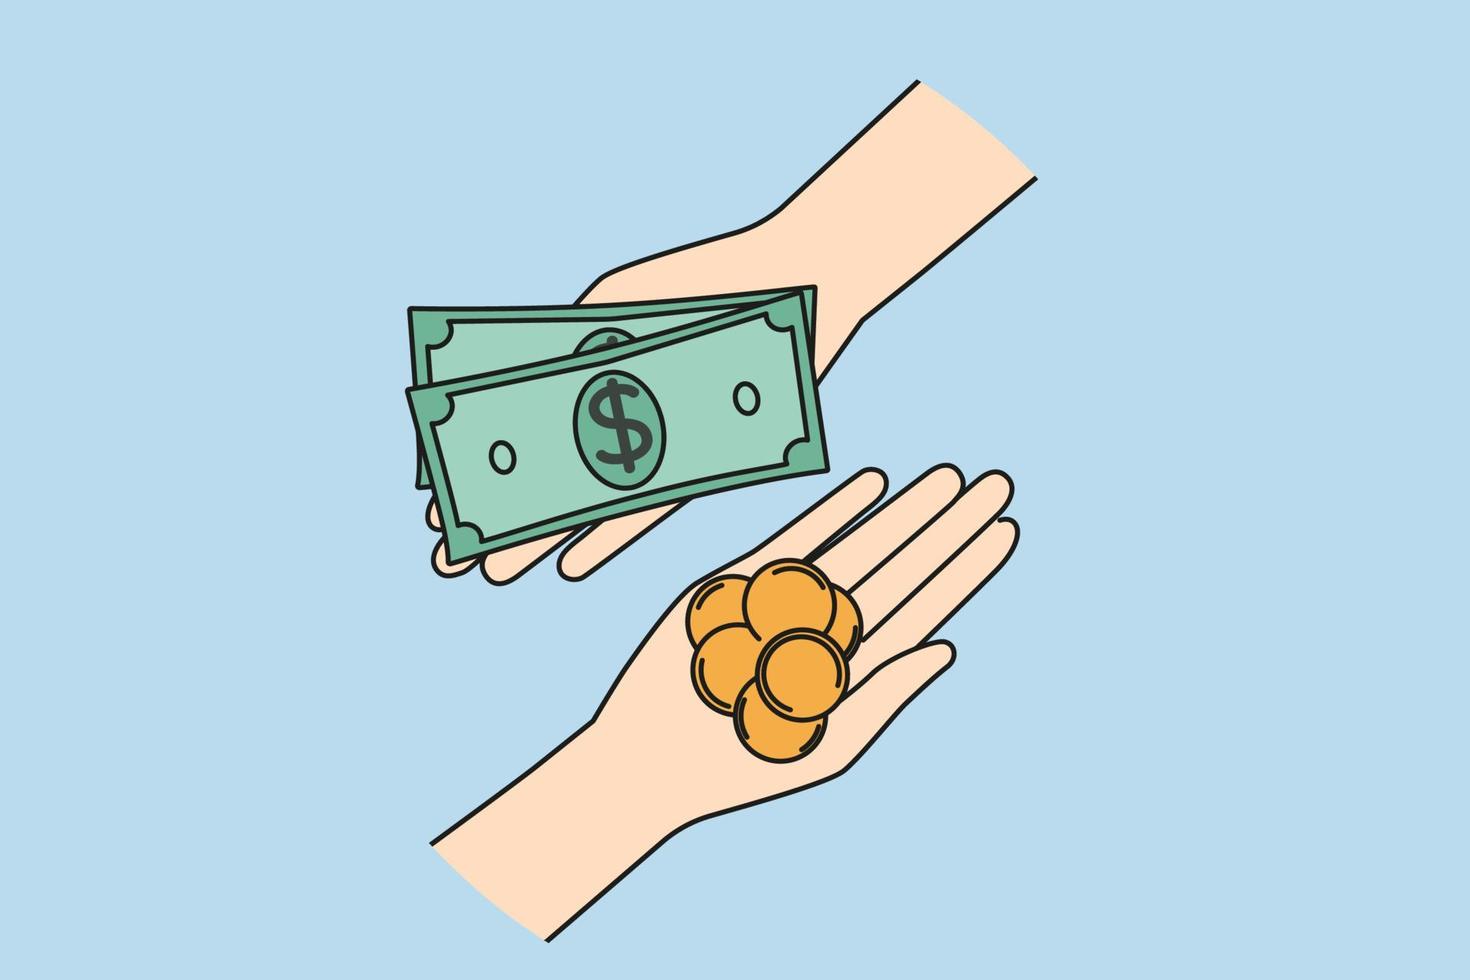 Hands with money engaged in finance exchange on market. People involved in currency exchange. Financial transaction concept. Vector illustration.